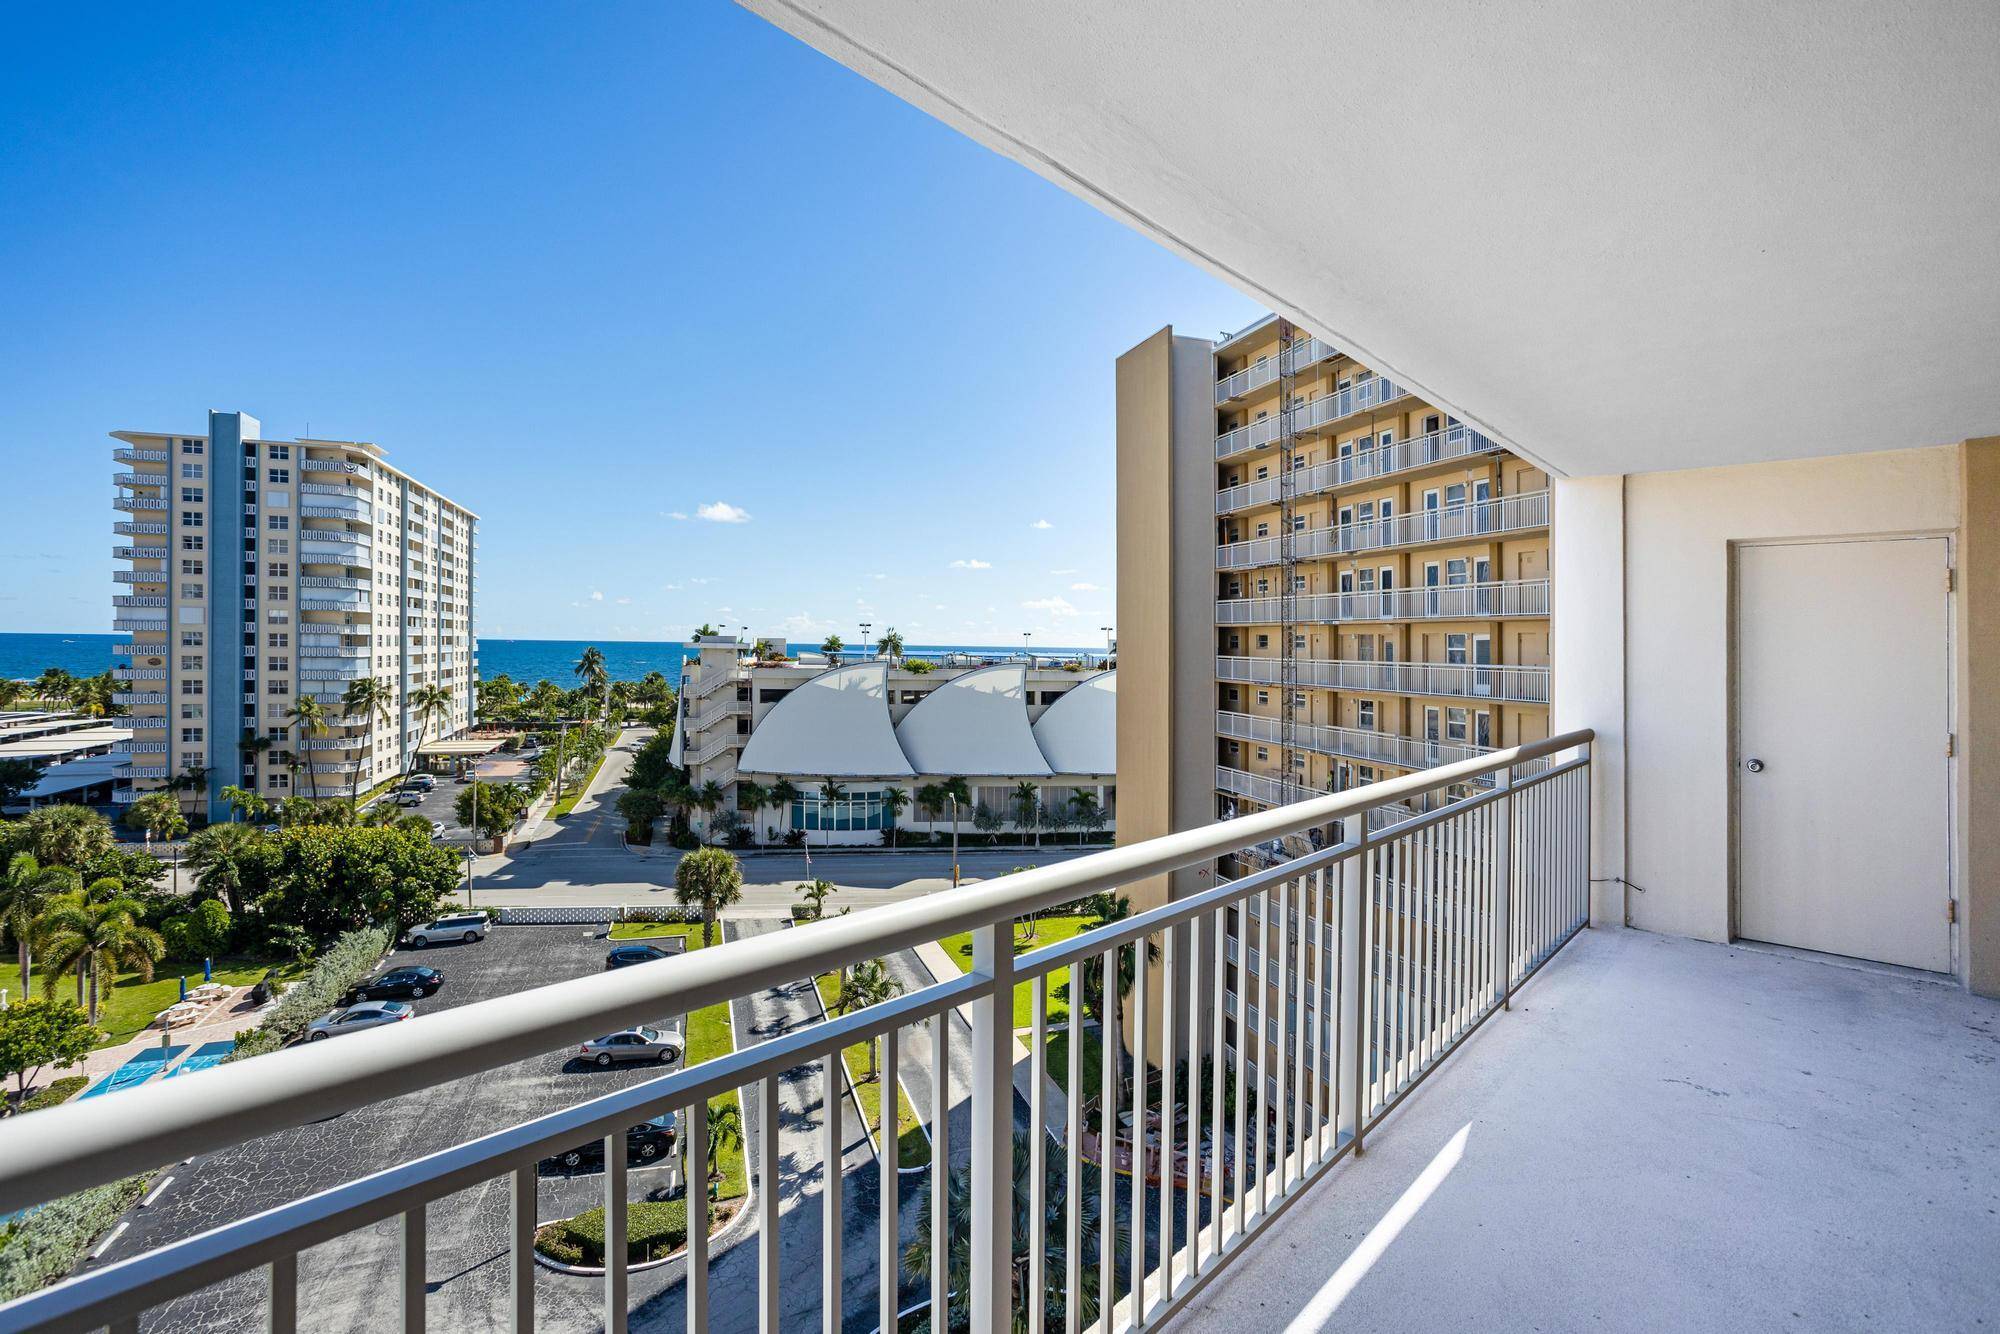 Live in the heart of newly rejuvenated Pompano Beach.